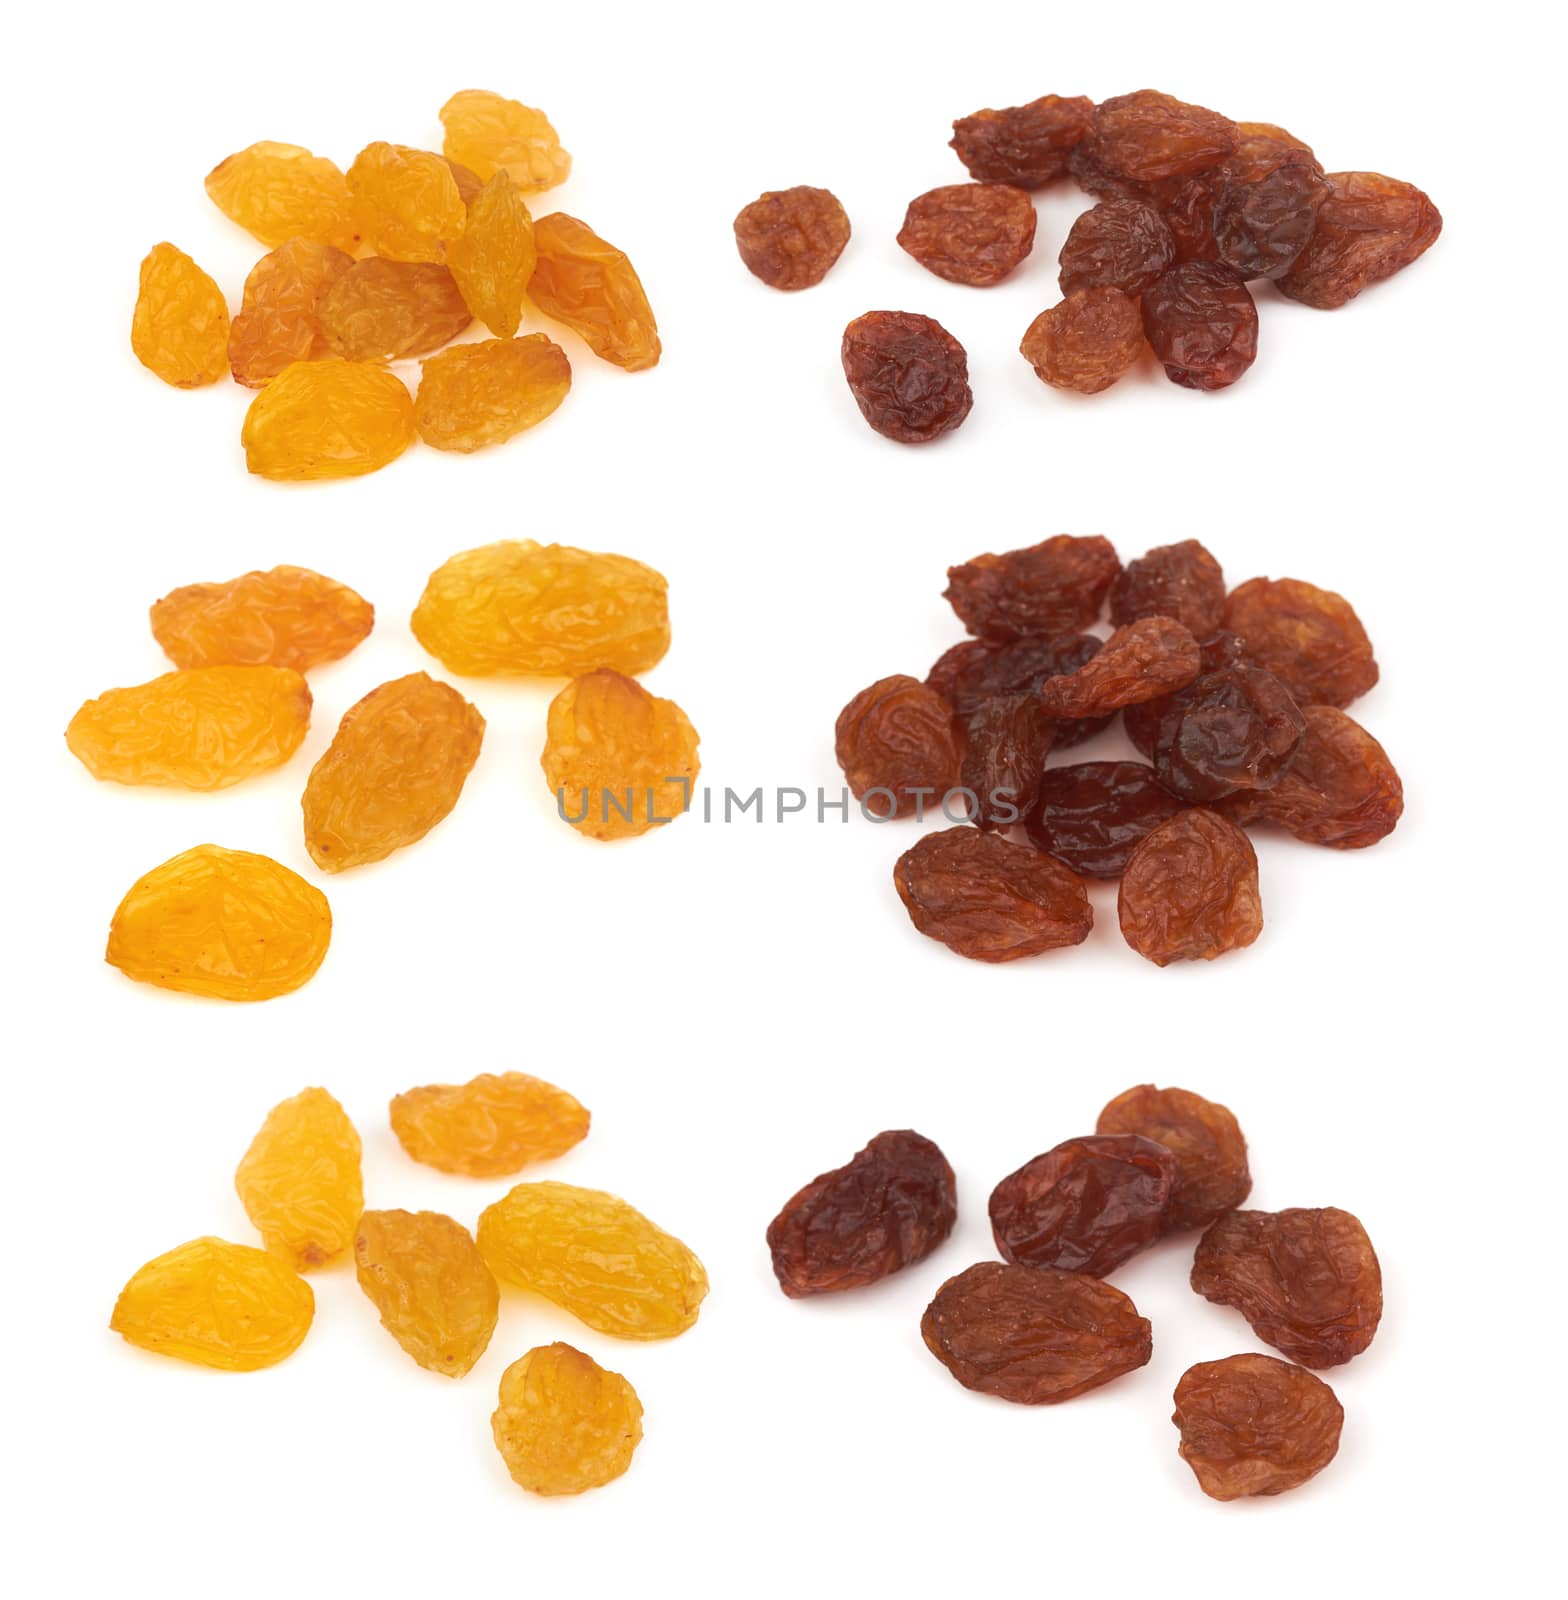 Dried raisins isolated on a white background